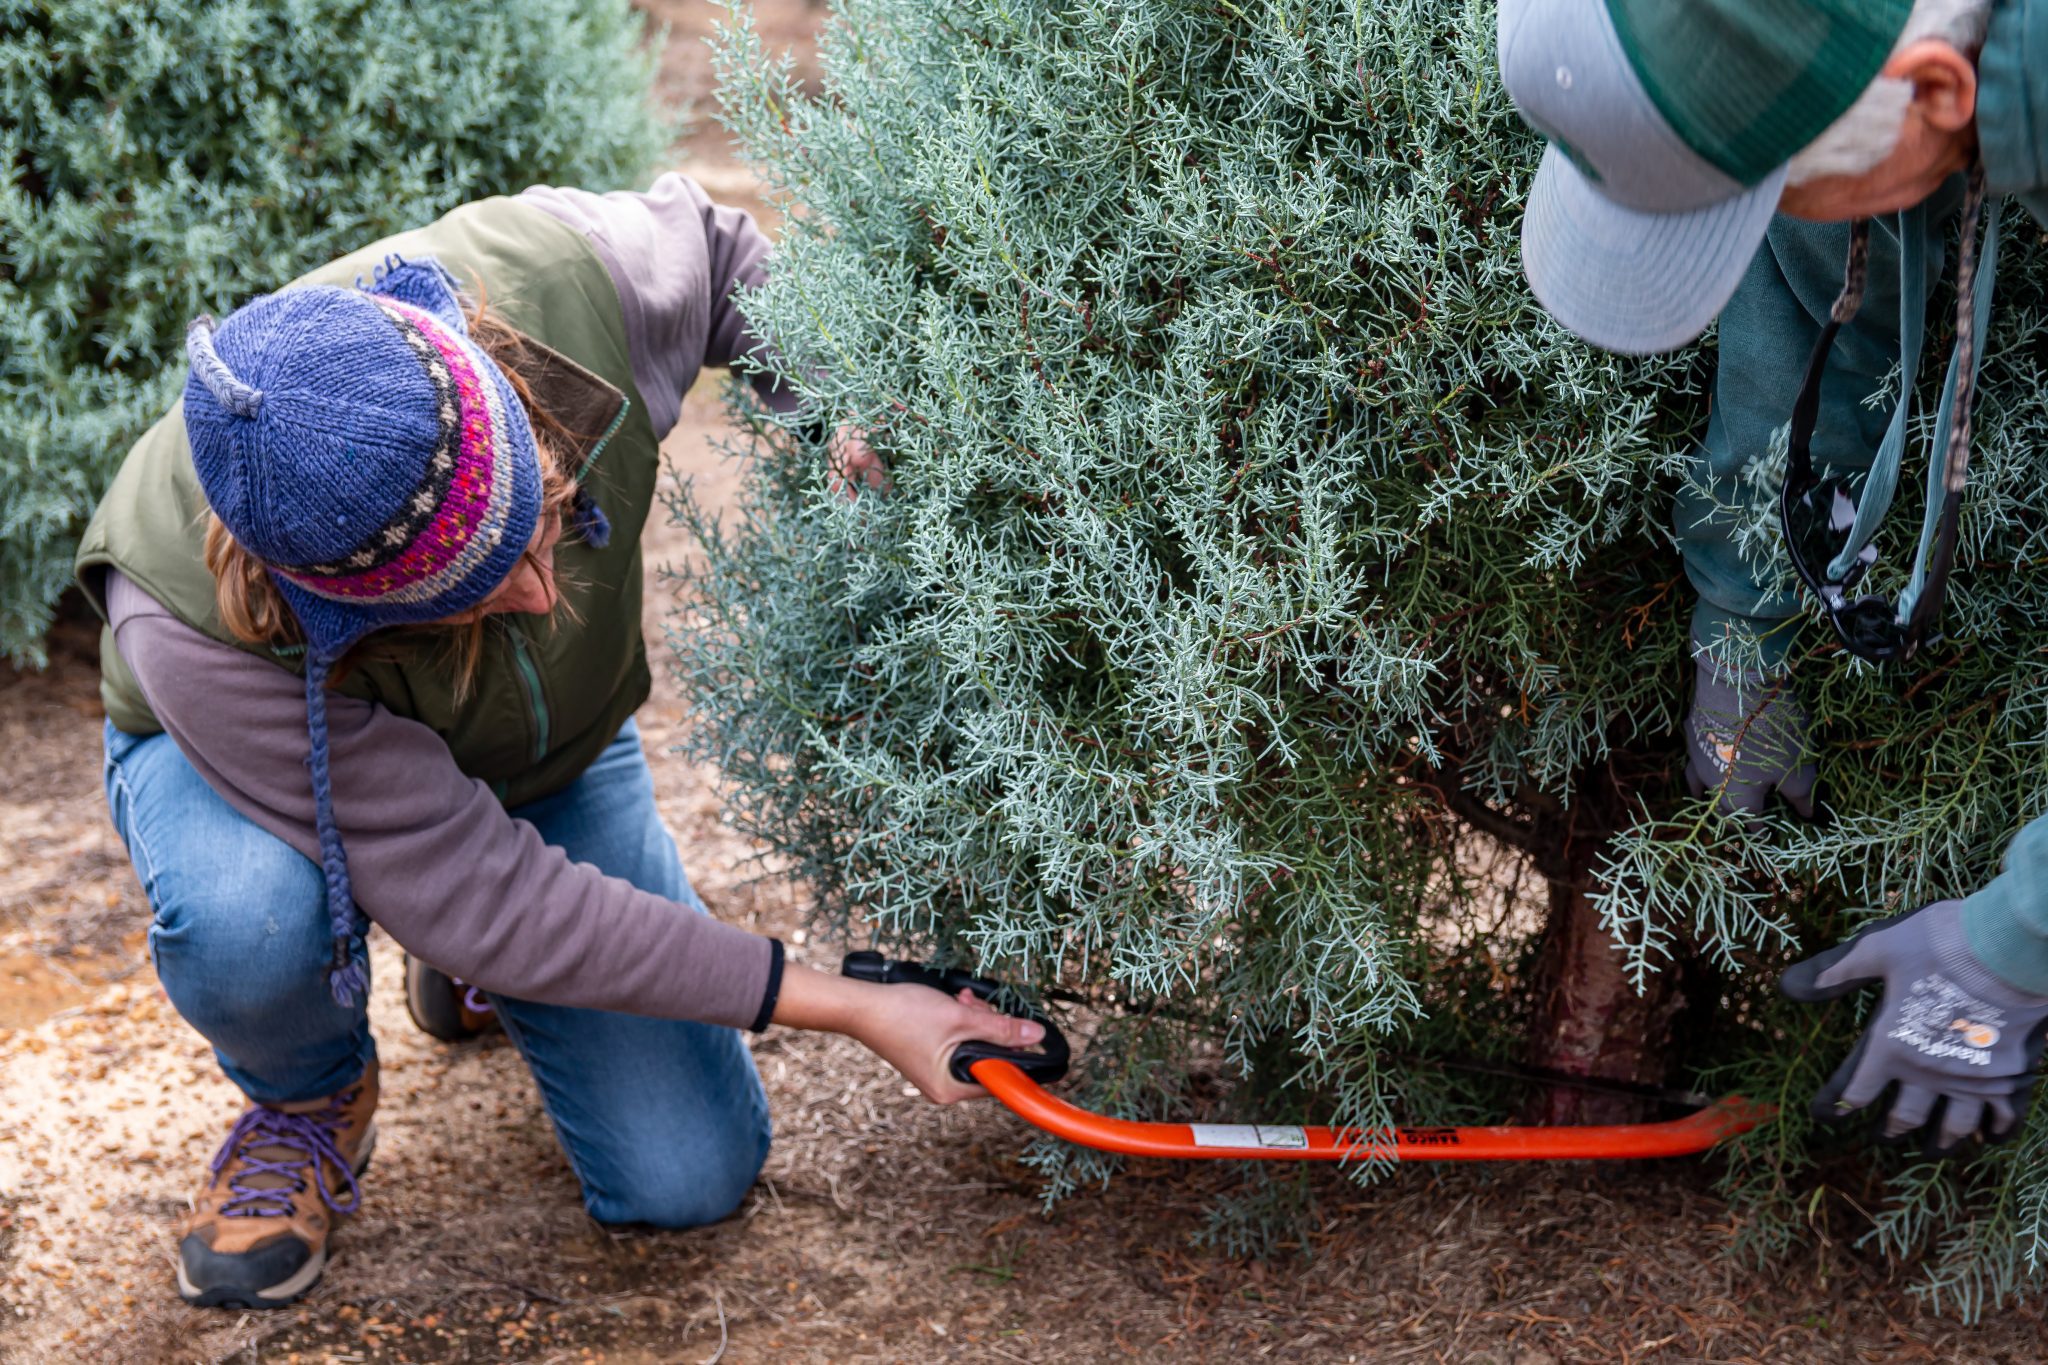 Featured image for “Christmas Tree Grower: Weather Events Led to Challenging Production Season”